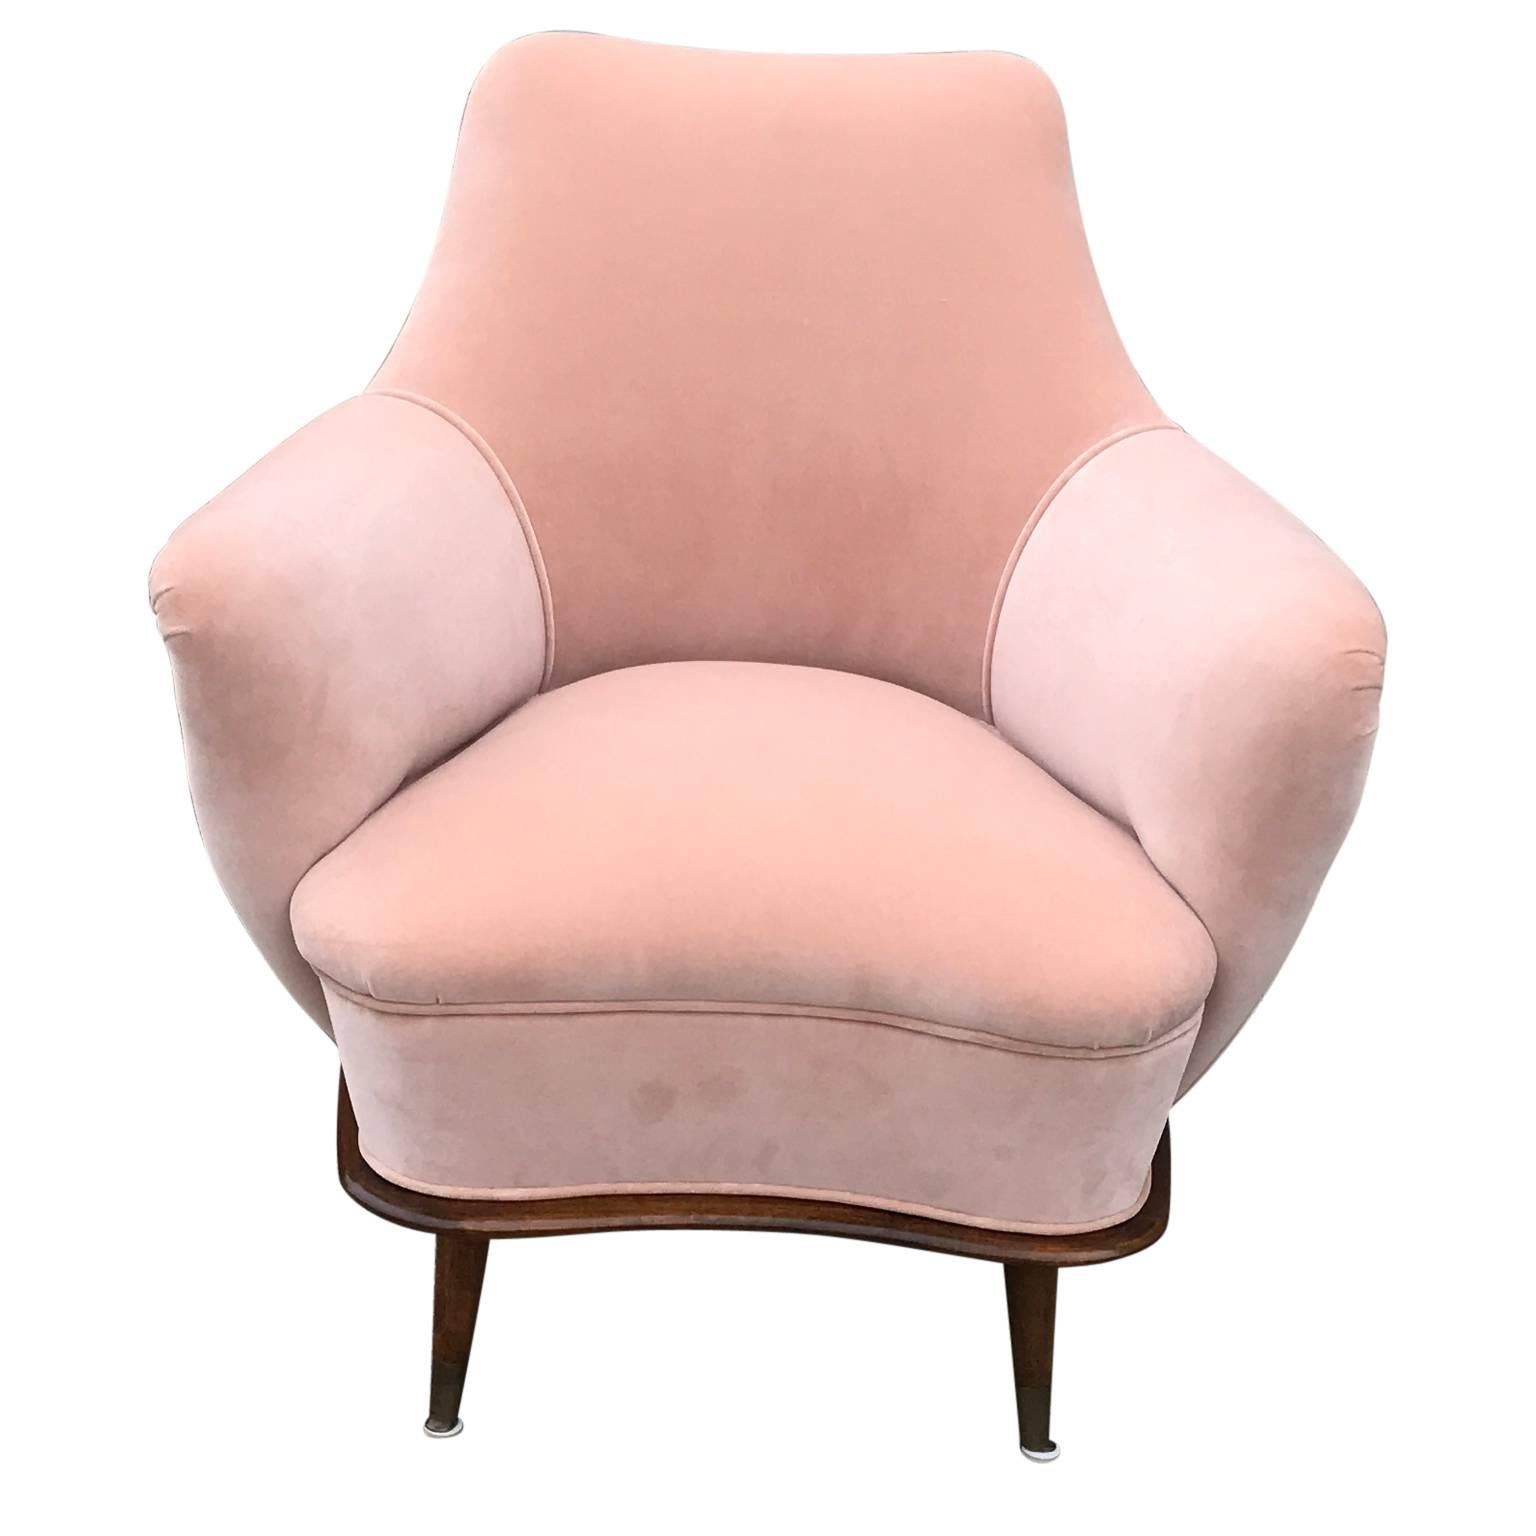 Lovely Modern Pair of Blush / Pink Velvet Italian Lounge Chairs with Walnut Bases. The chairs have been fully stripped to the frame and restored. The chairs Date from the late 1940s or the early 1950s. Subtle curved brass caps accent the base of the